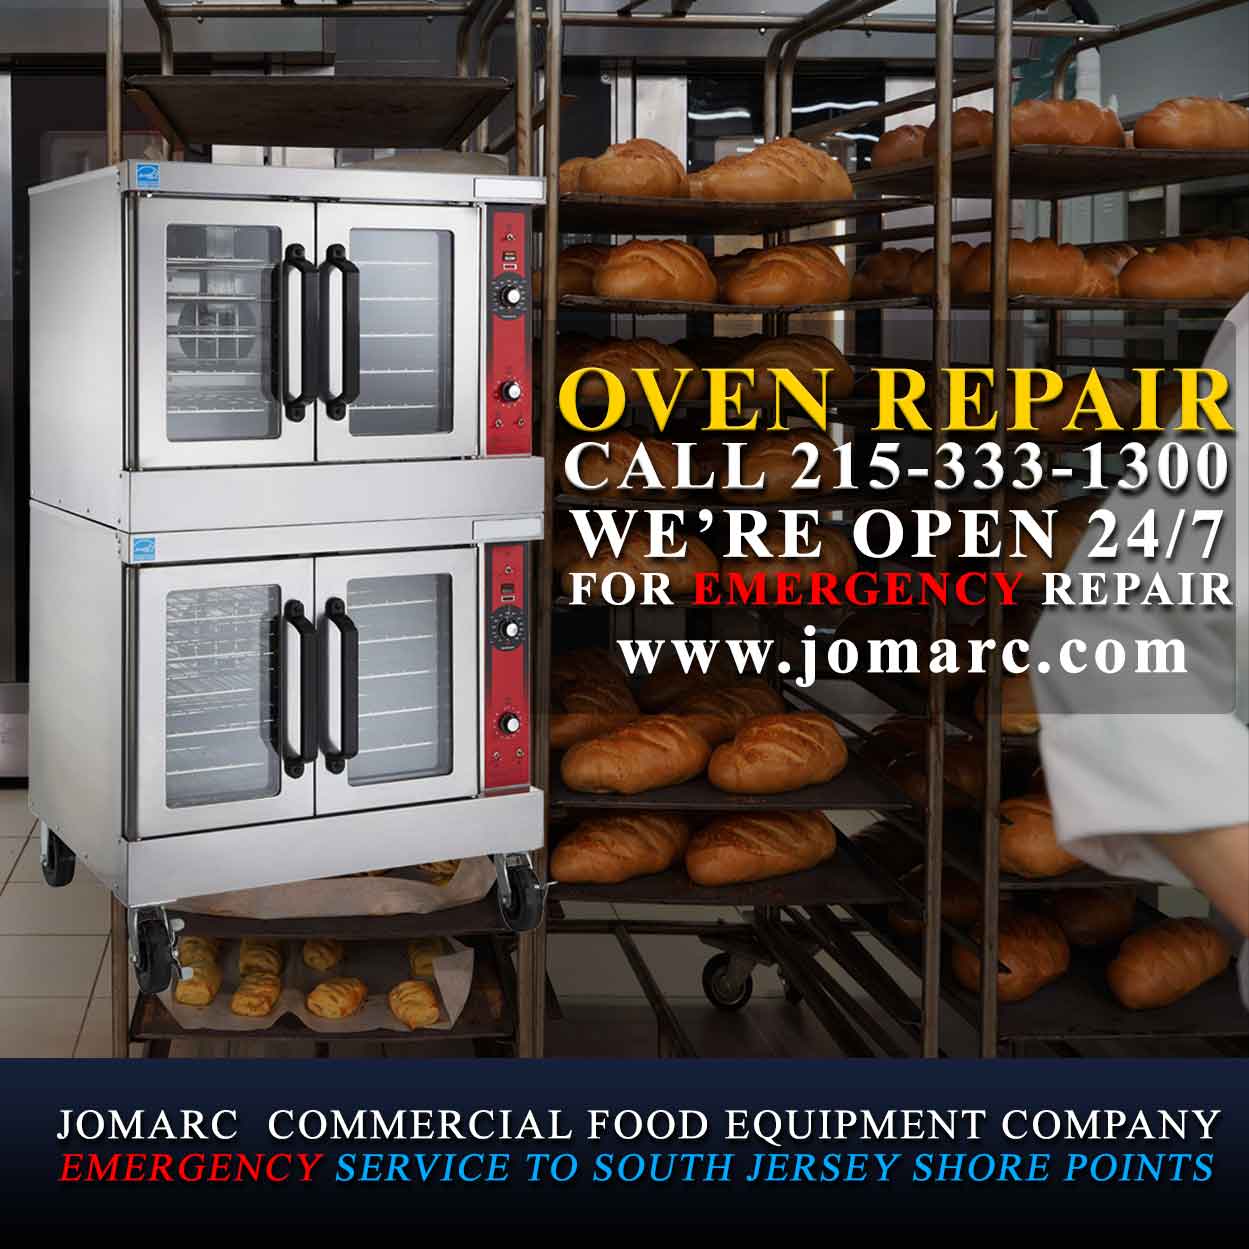 Jomarc services all brands and models of commerical ovens: Alto-Shaam, Amana Commercial Microwaves, Avantco Equipment, Axis, Bakers Pride, Blodgett, Cres Cor, Convotherm, Cooking Performance Group, Doyon Baking Equipment, Galaxy Garland / US Range, Global Solutions by Nemco, Merrychef, NU-VU, Rational, Solwave, TurboChef, Vollrath, Vulcan, Waring, Wells 